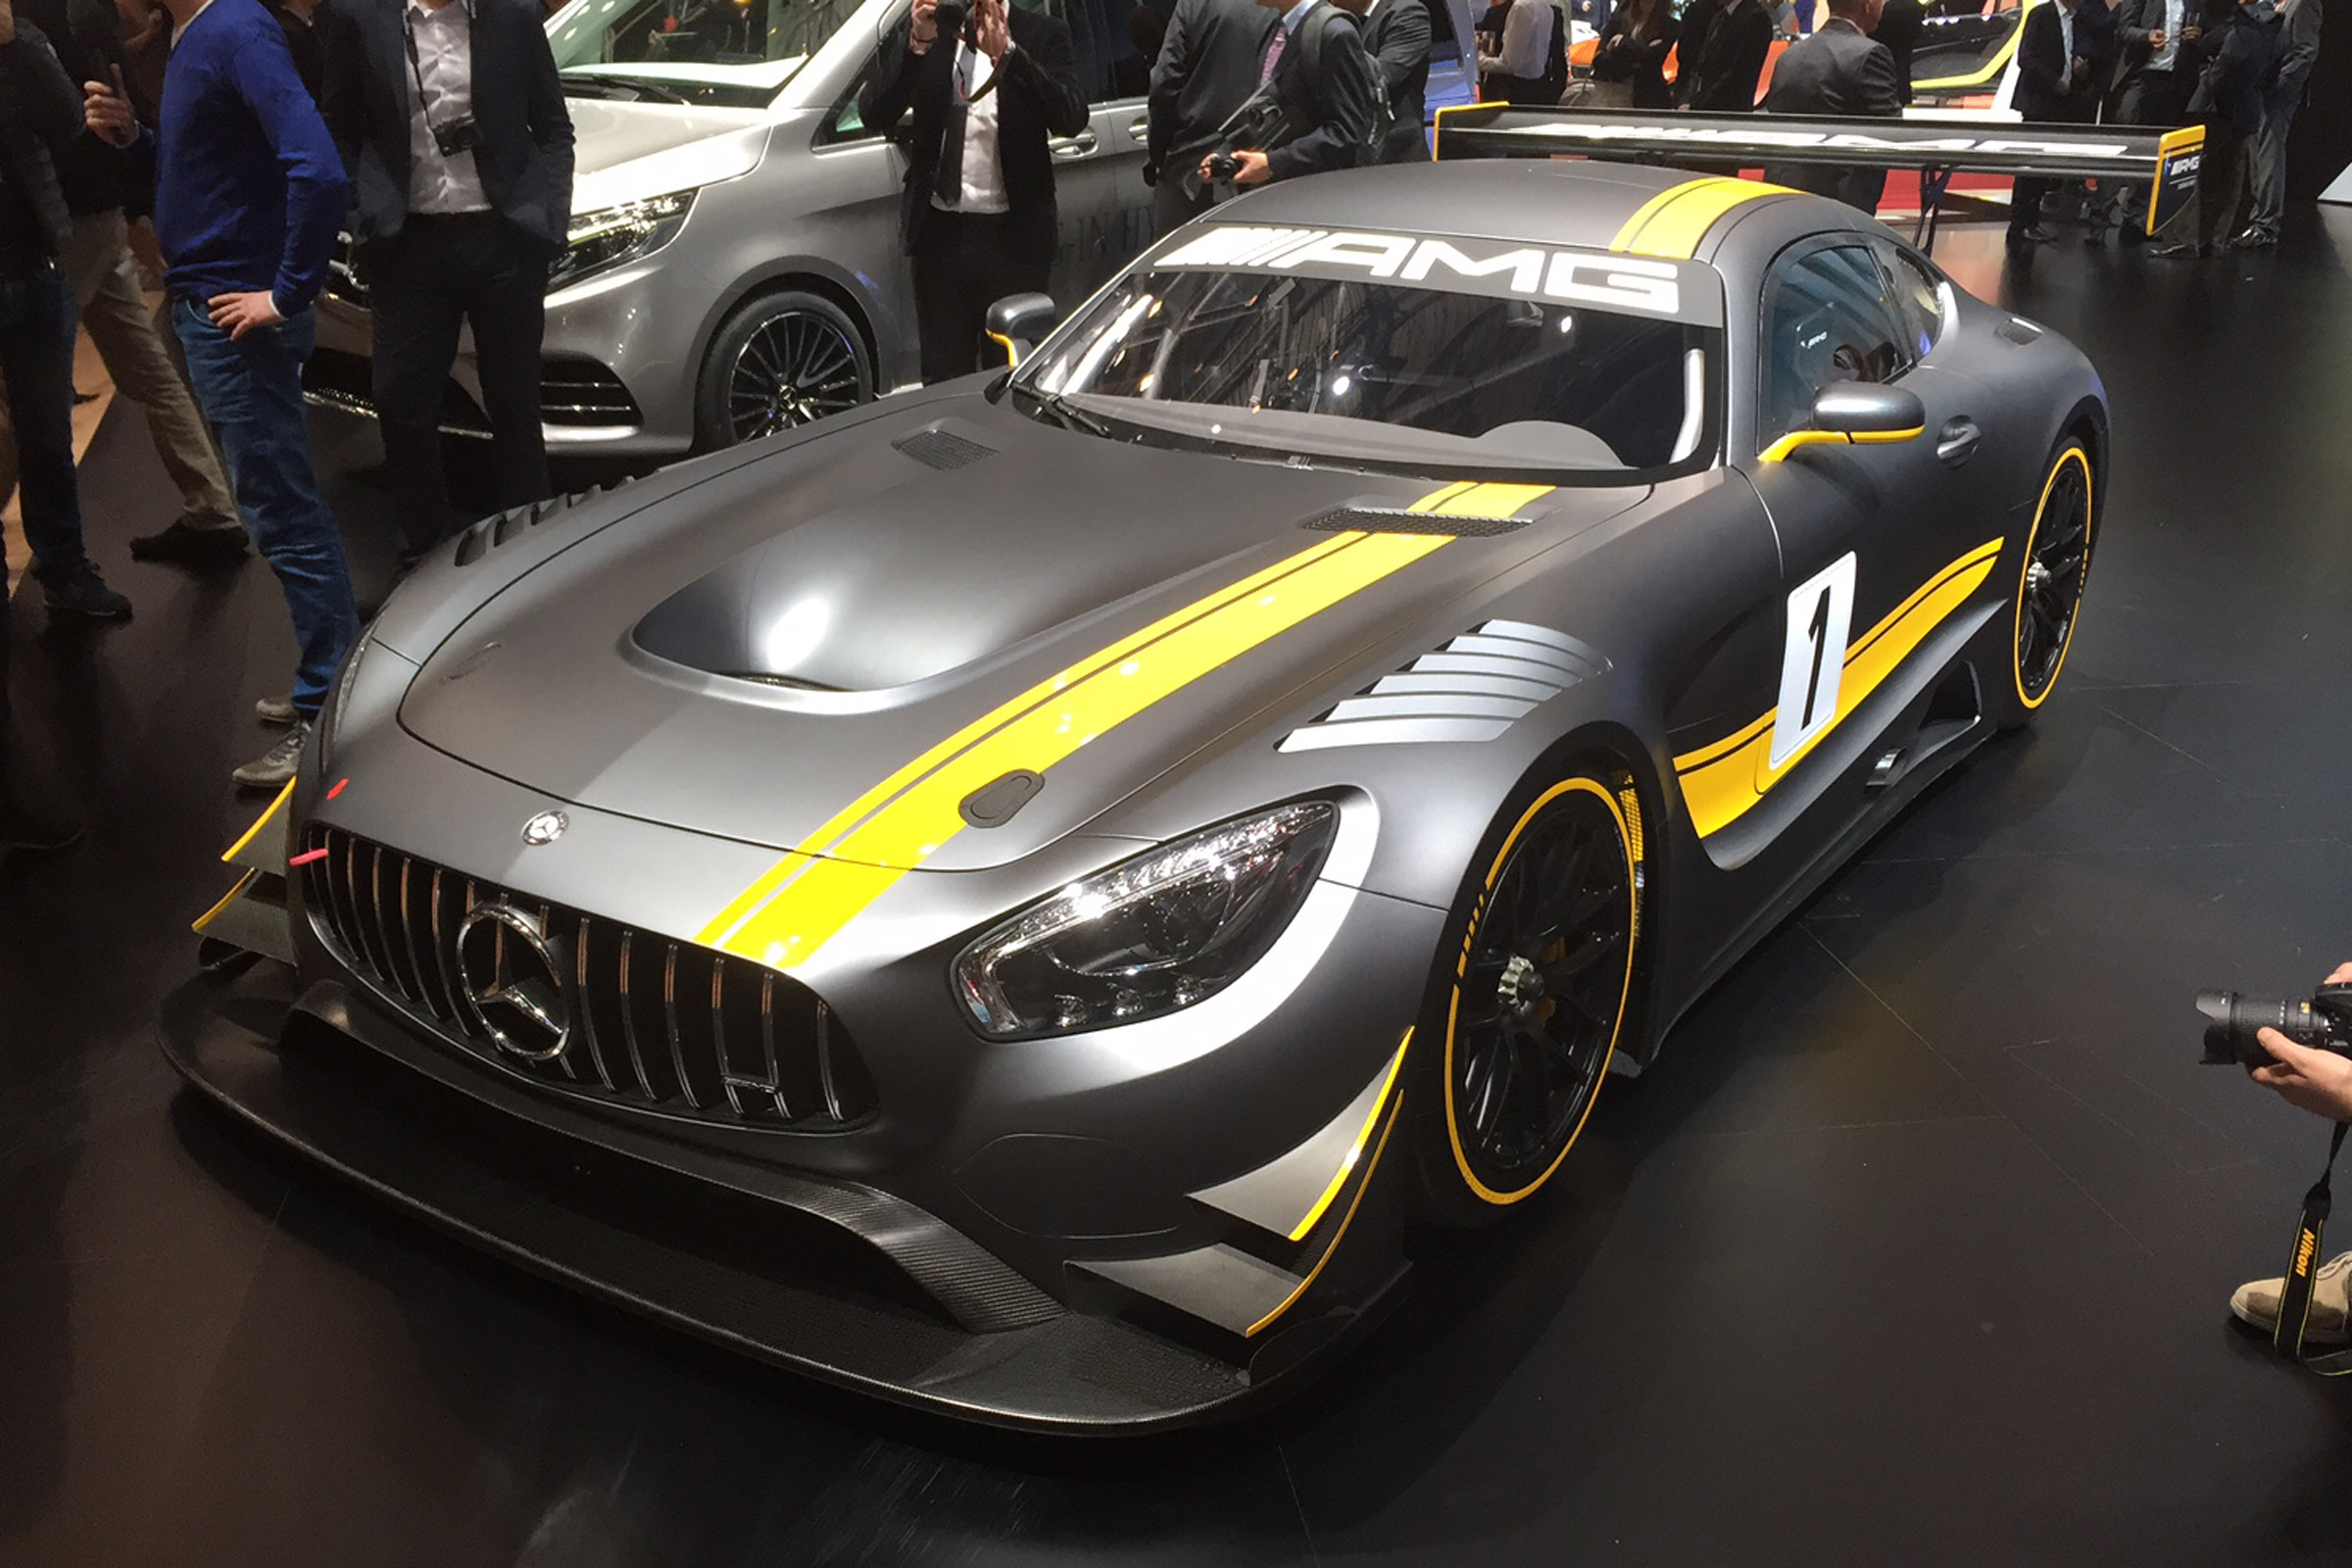 Mercedes Amg Gt3 Is Last Outing For Storming 6 2 Litre V8 Auto Express